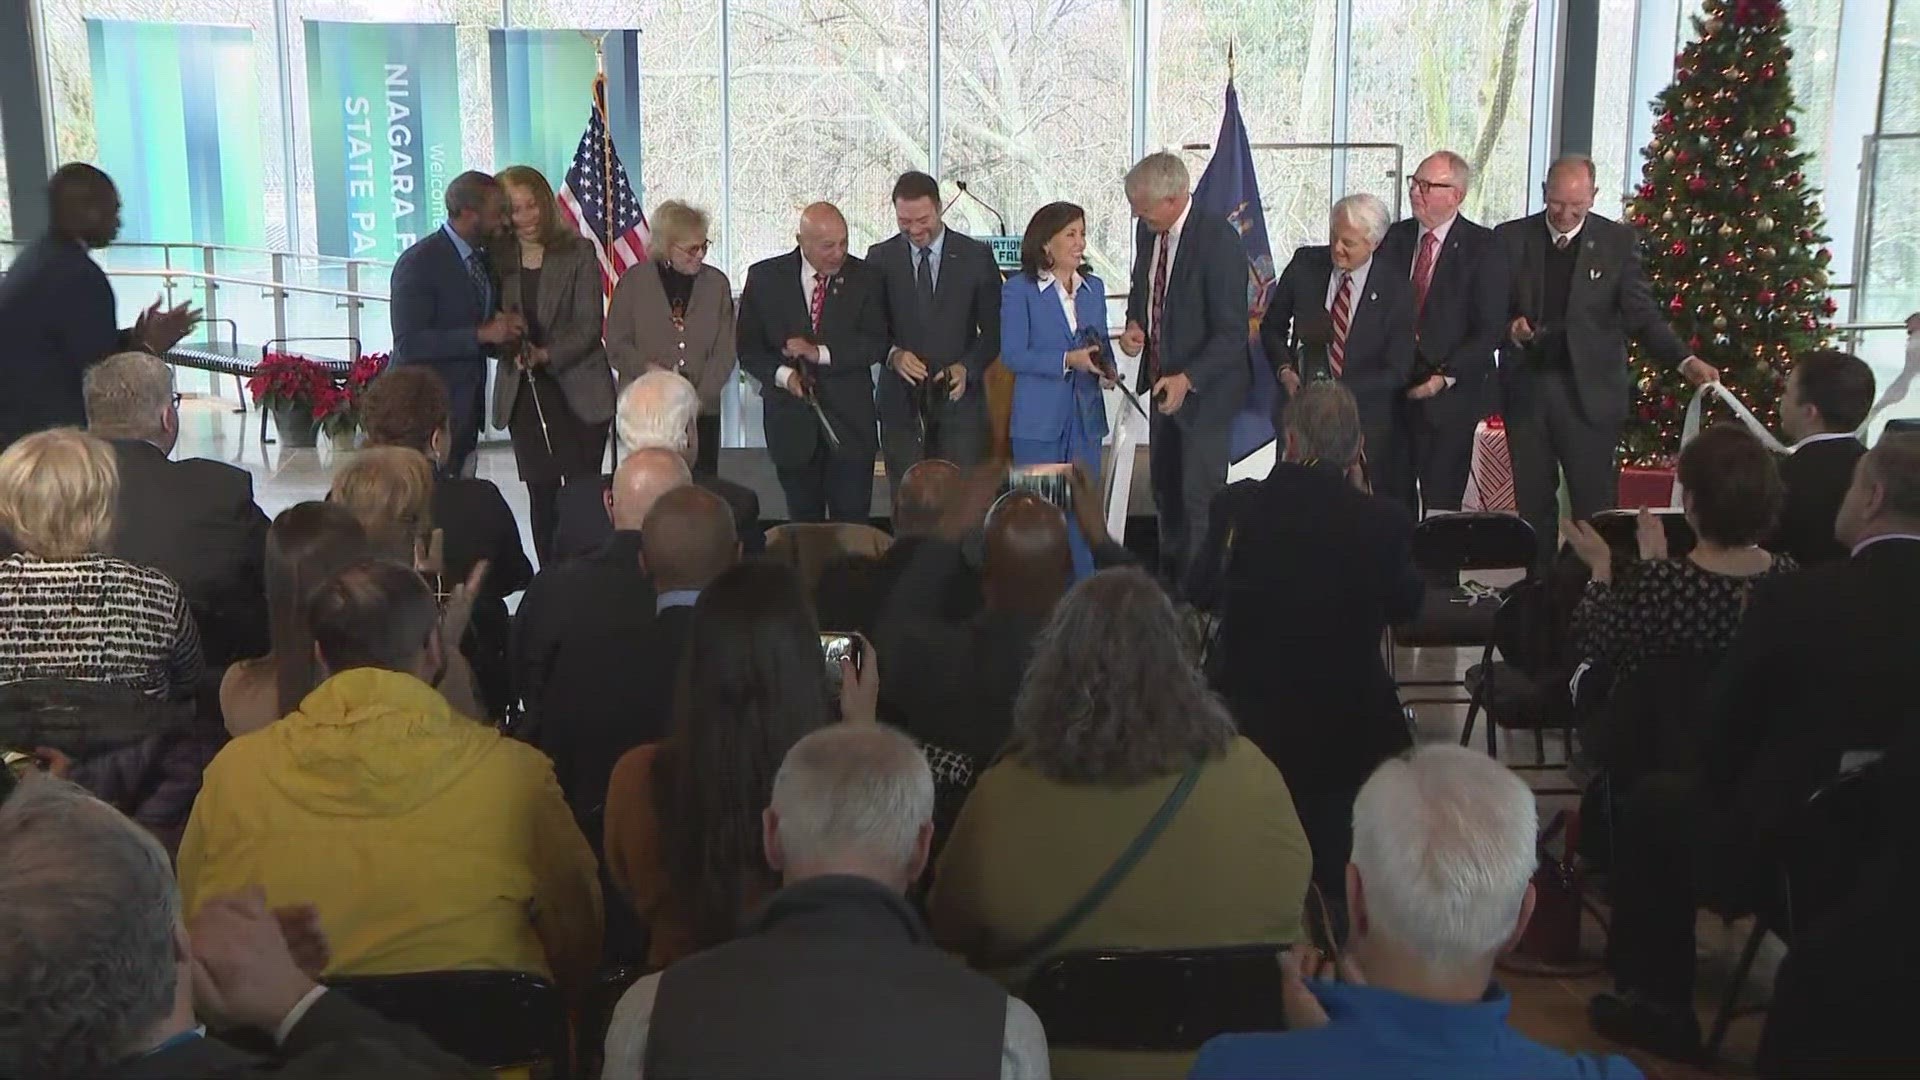 Governor Kathy Hochul cuts the ribbon at the new Niagara Falls State Park 'Ralph C. Wilson Welcome Center'